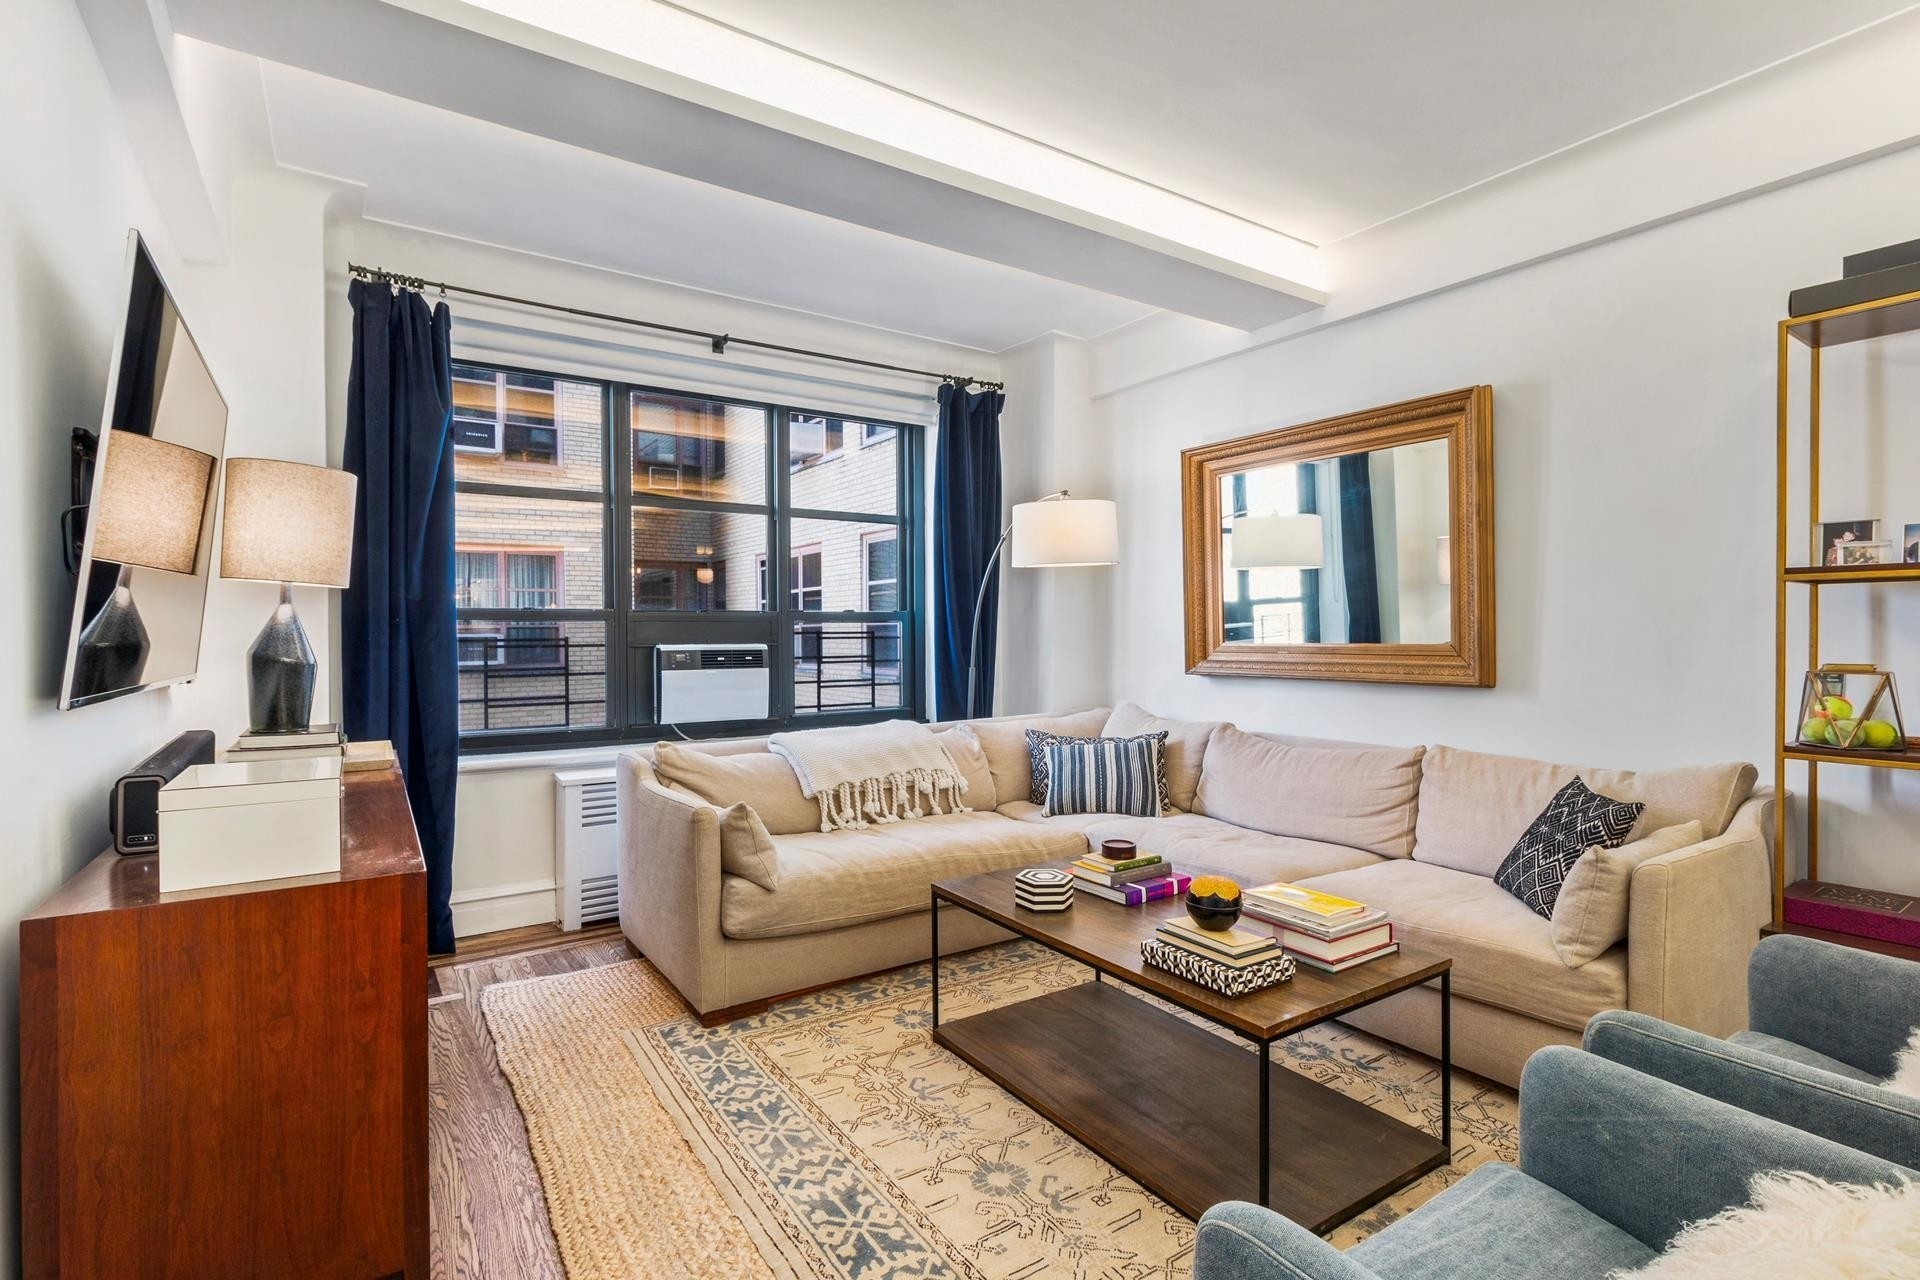 Co-op Properties for Sale at Gramercy House, 235 E 22ND ST, 11T Gramercy Park, New York, New York 10010